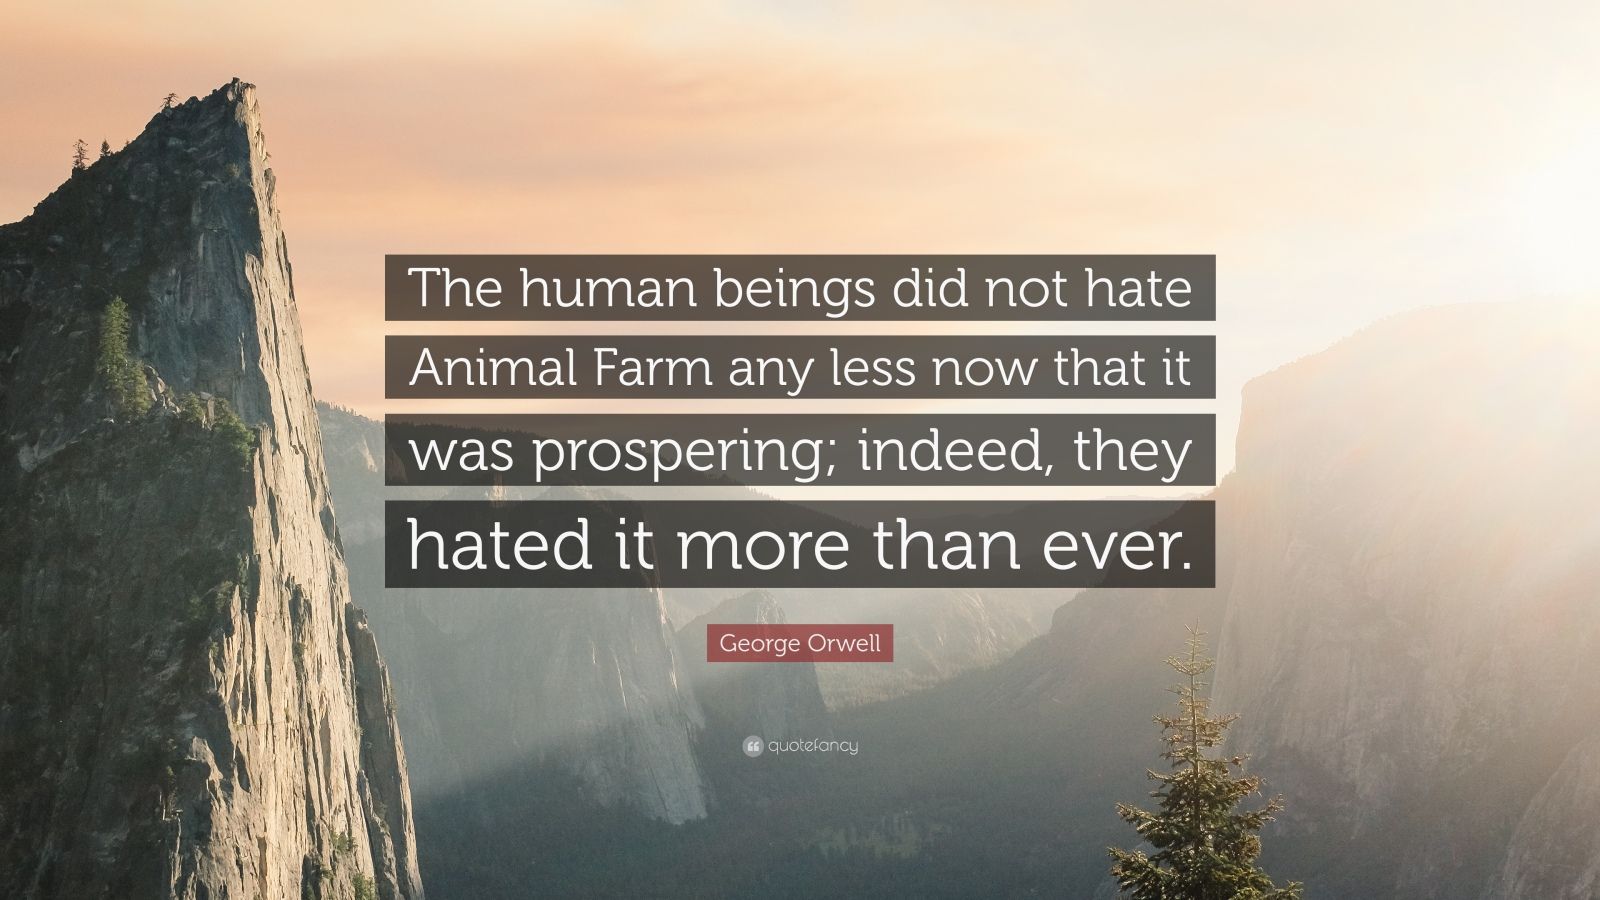 George Orwell Quote: “The human beings did not hate Animal Farm any less  now that it was prospering; indeed, they hated it more than ever.”